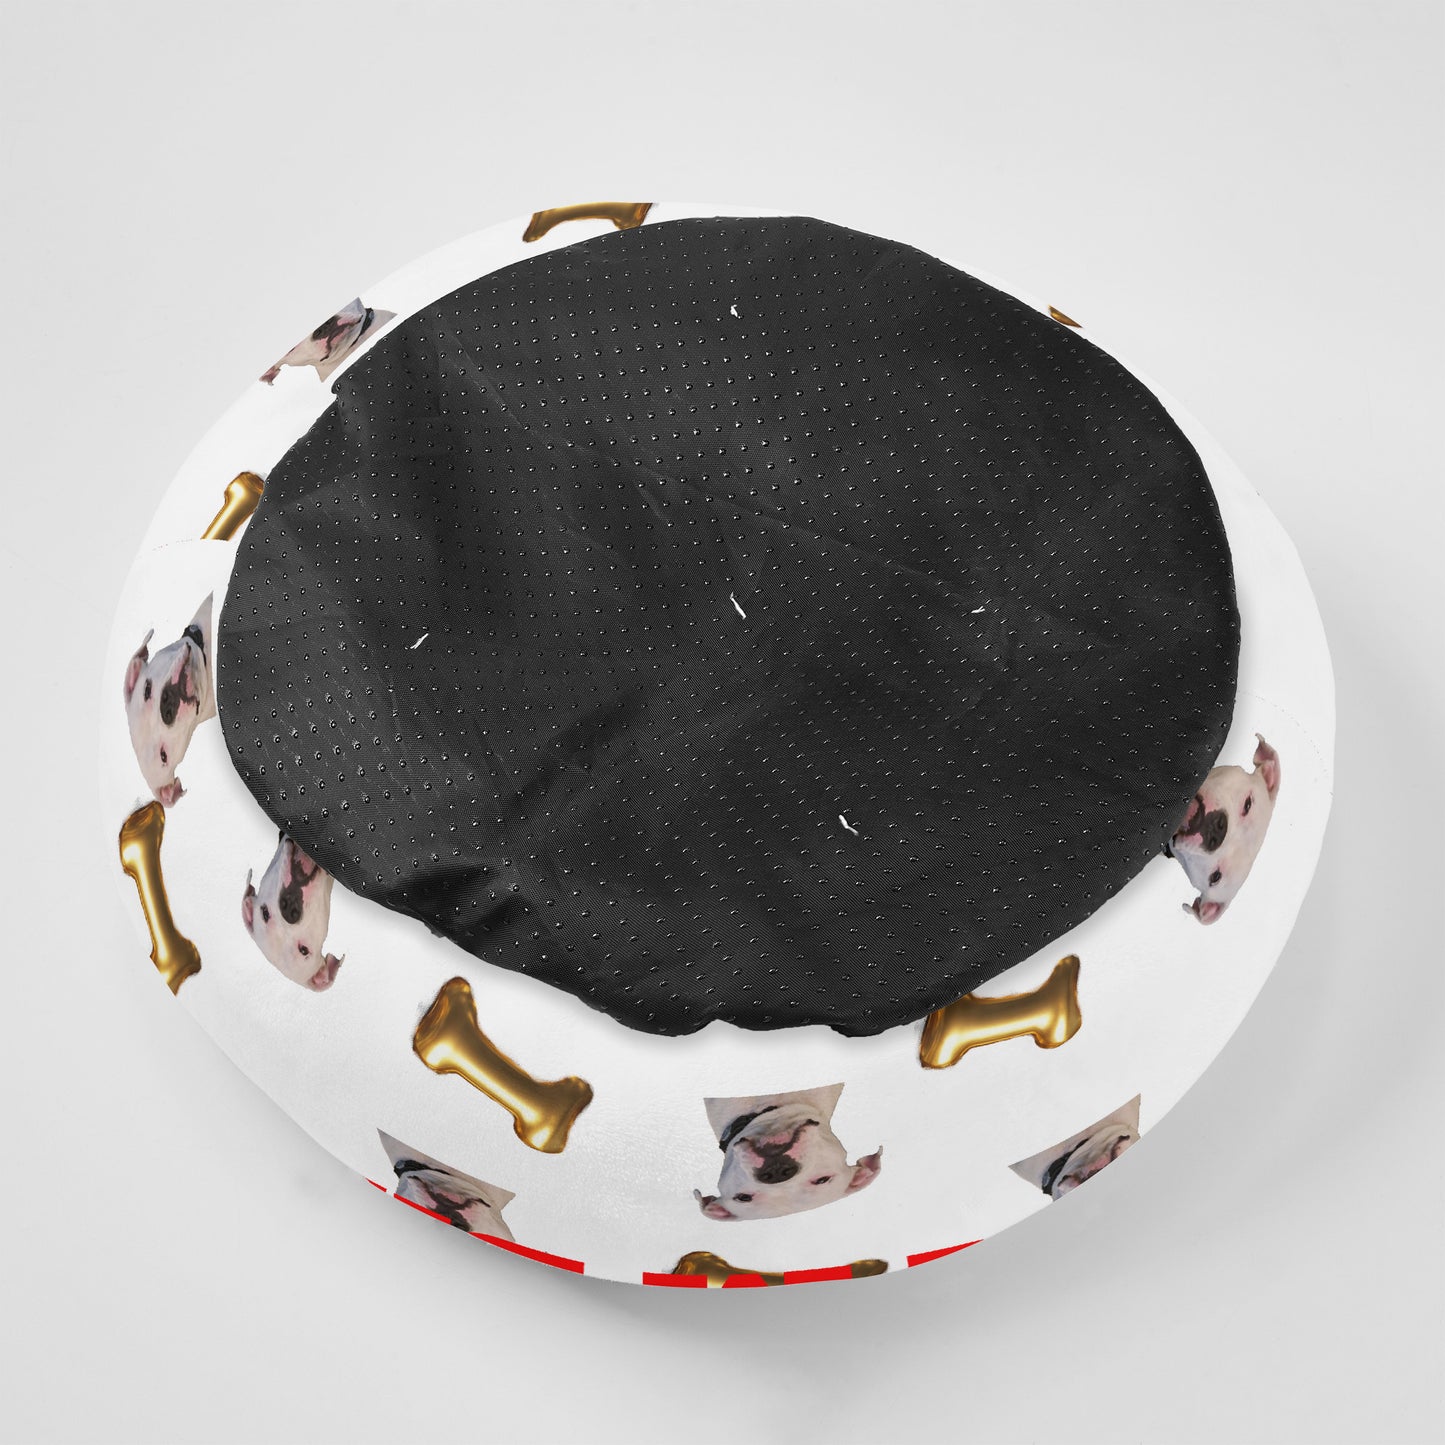 THE CAPONE PET BED